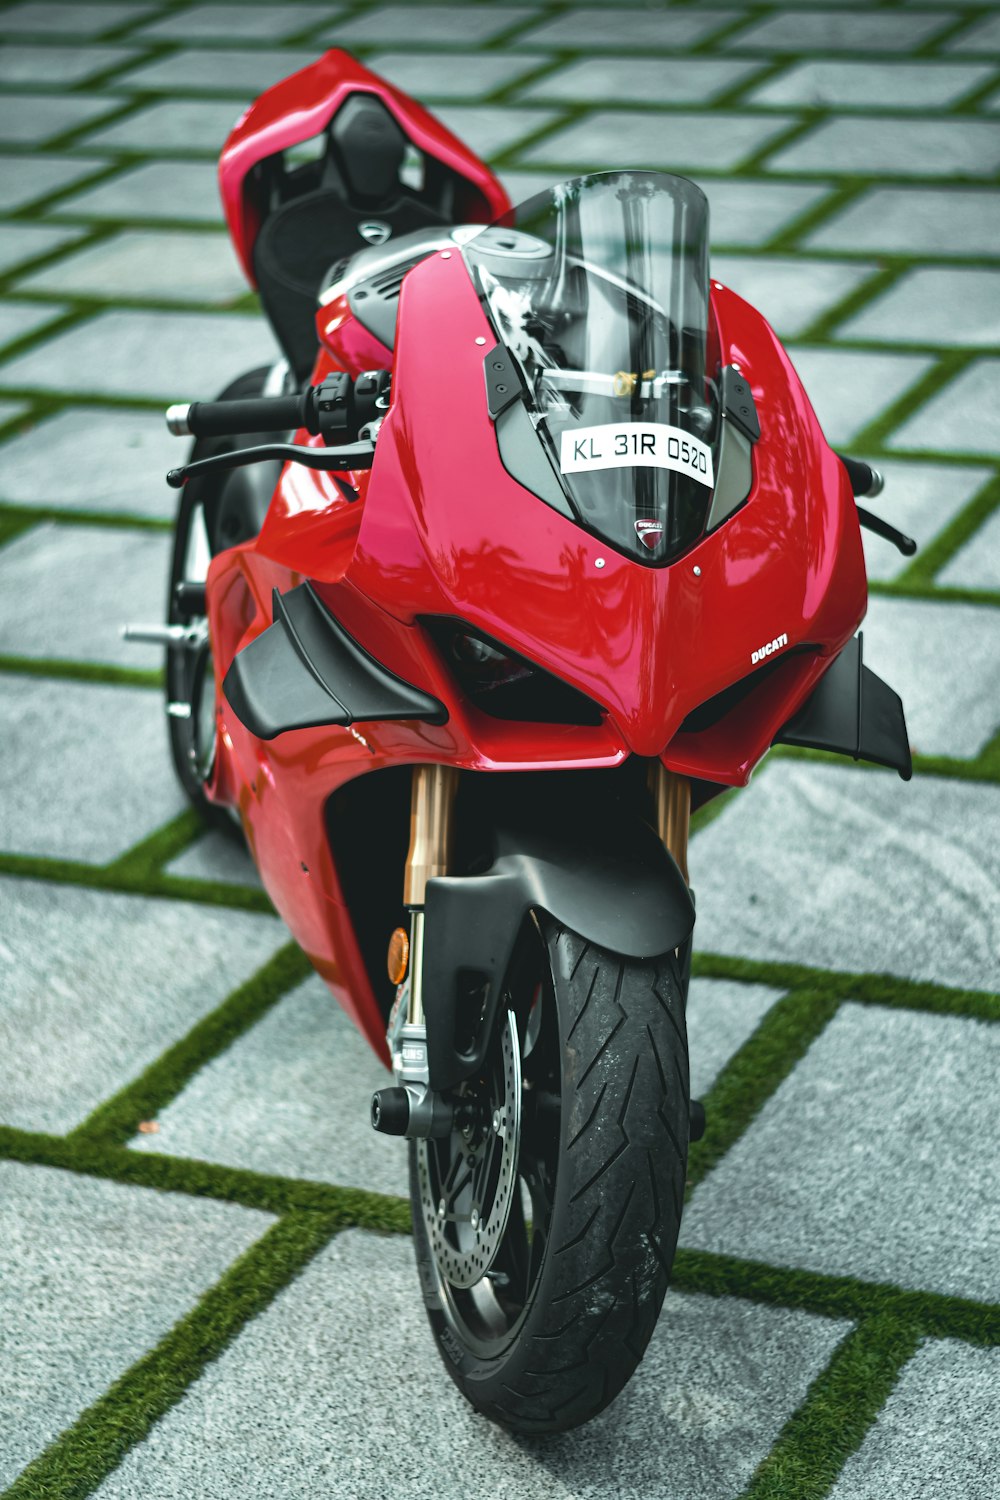 a red motorcycle parked on top of a tiled floor